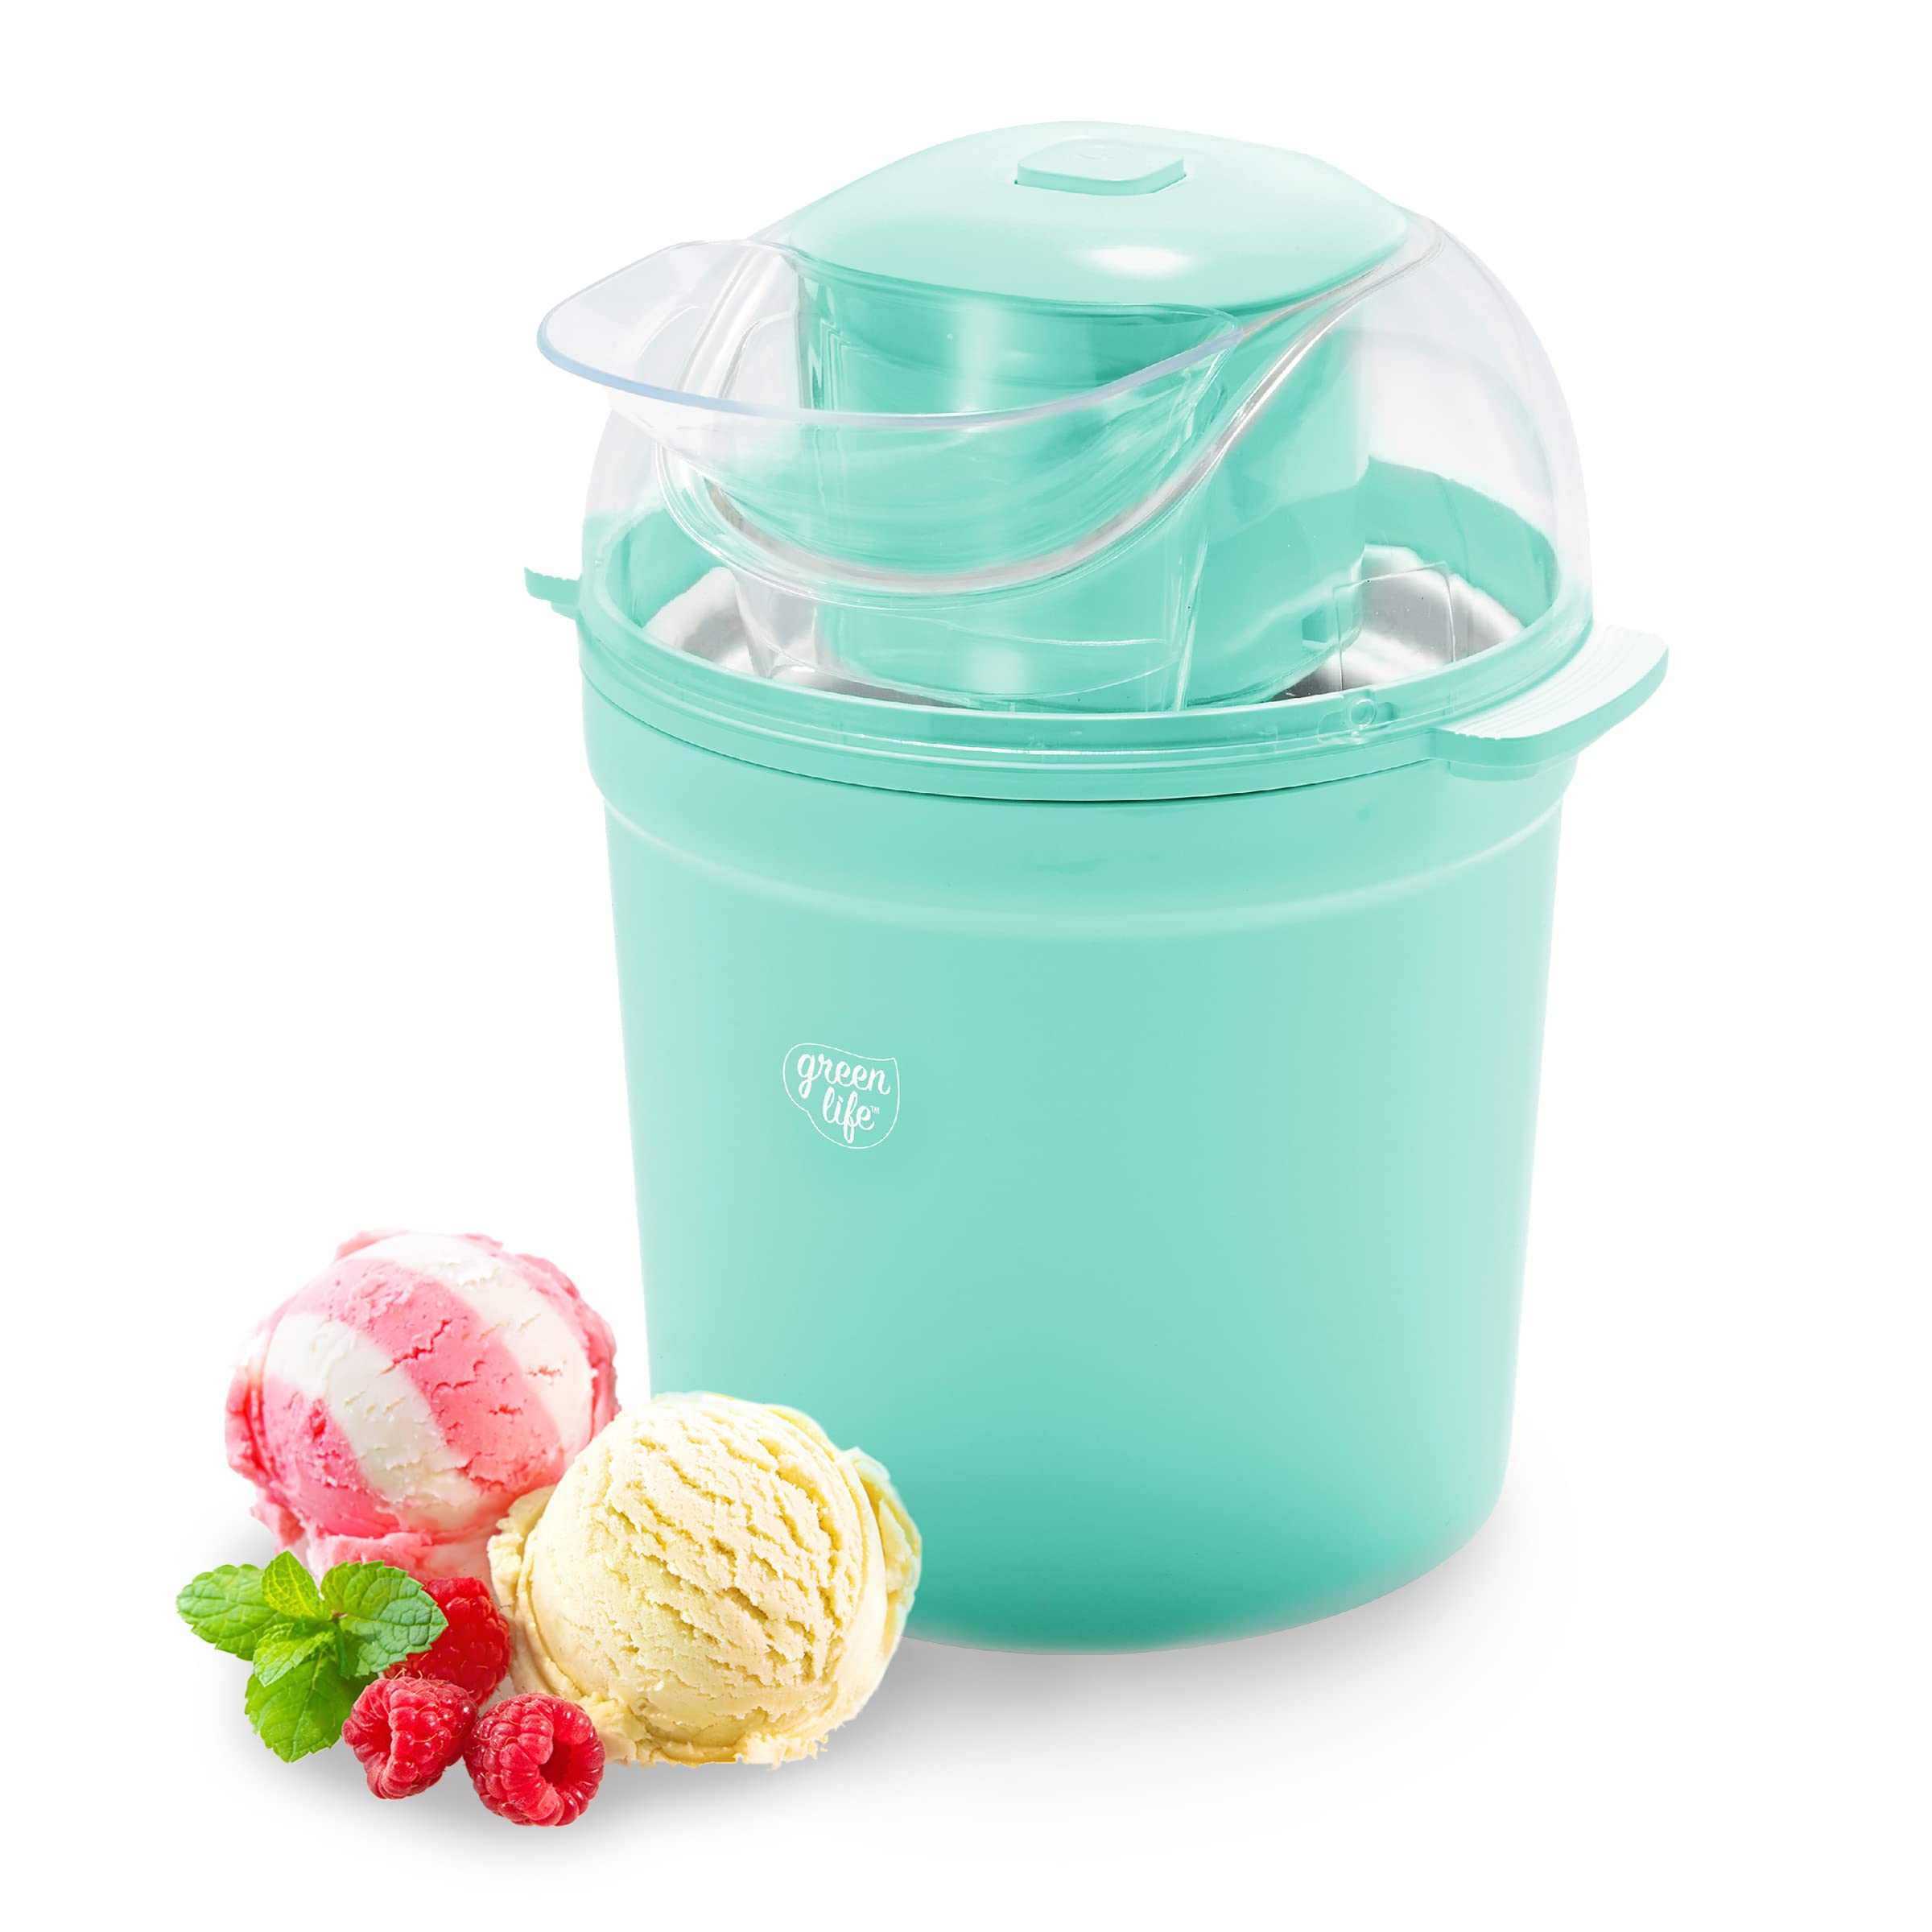 GreenLife Healthy Ceramic Nonstick 1.5QT Express Ice Cream Maker, Turquoise or Red